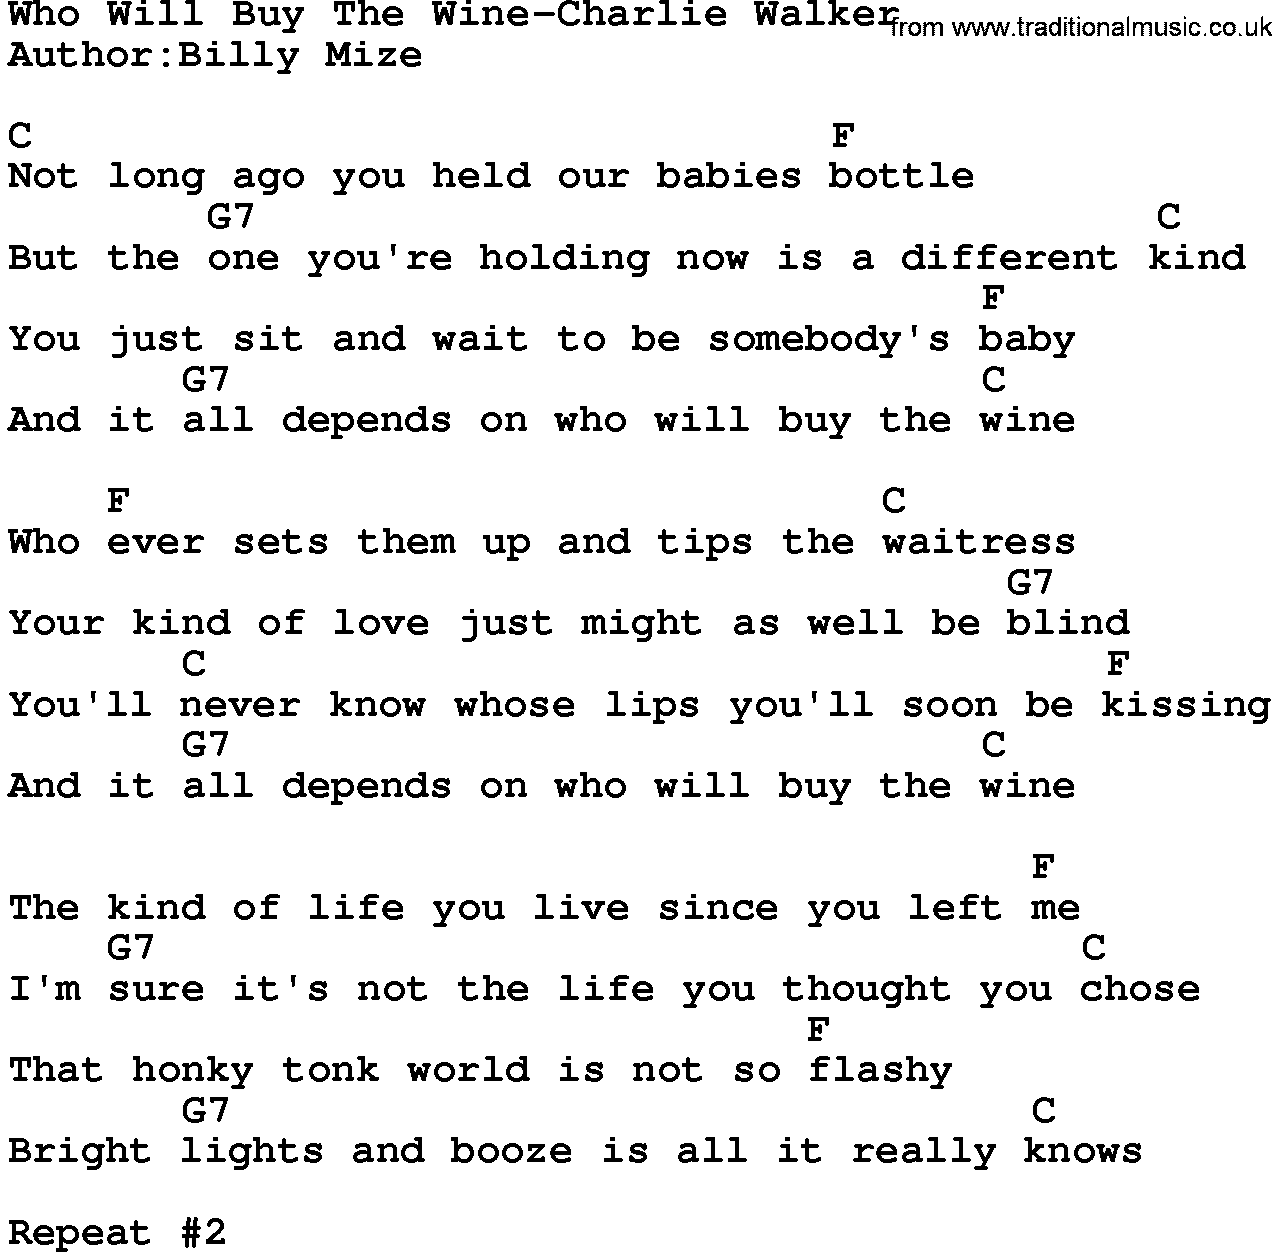 Country music song: Who Will Buy The Wine-Charlie Walker lyrics and chords